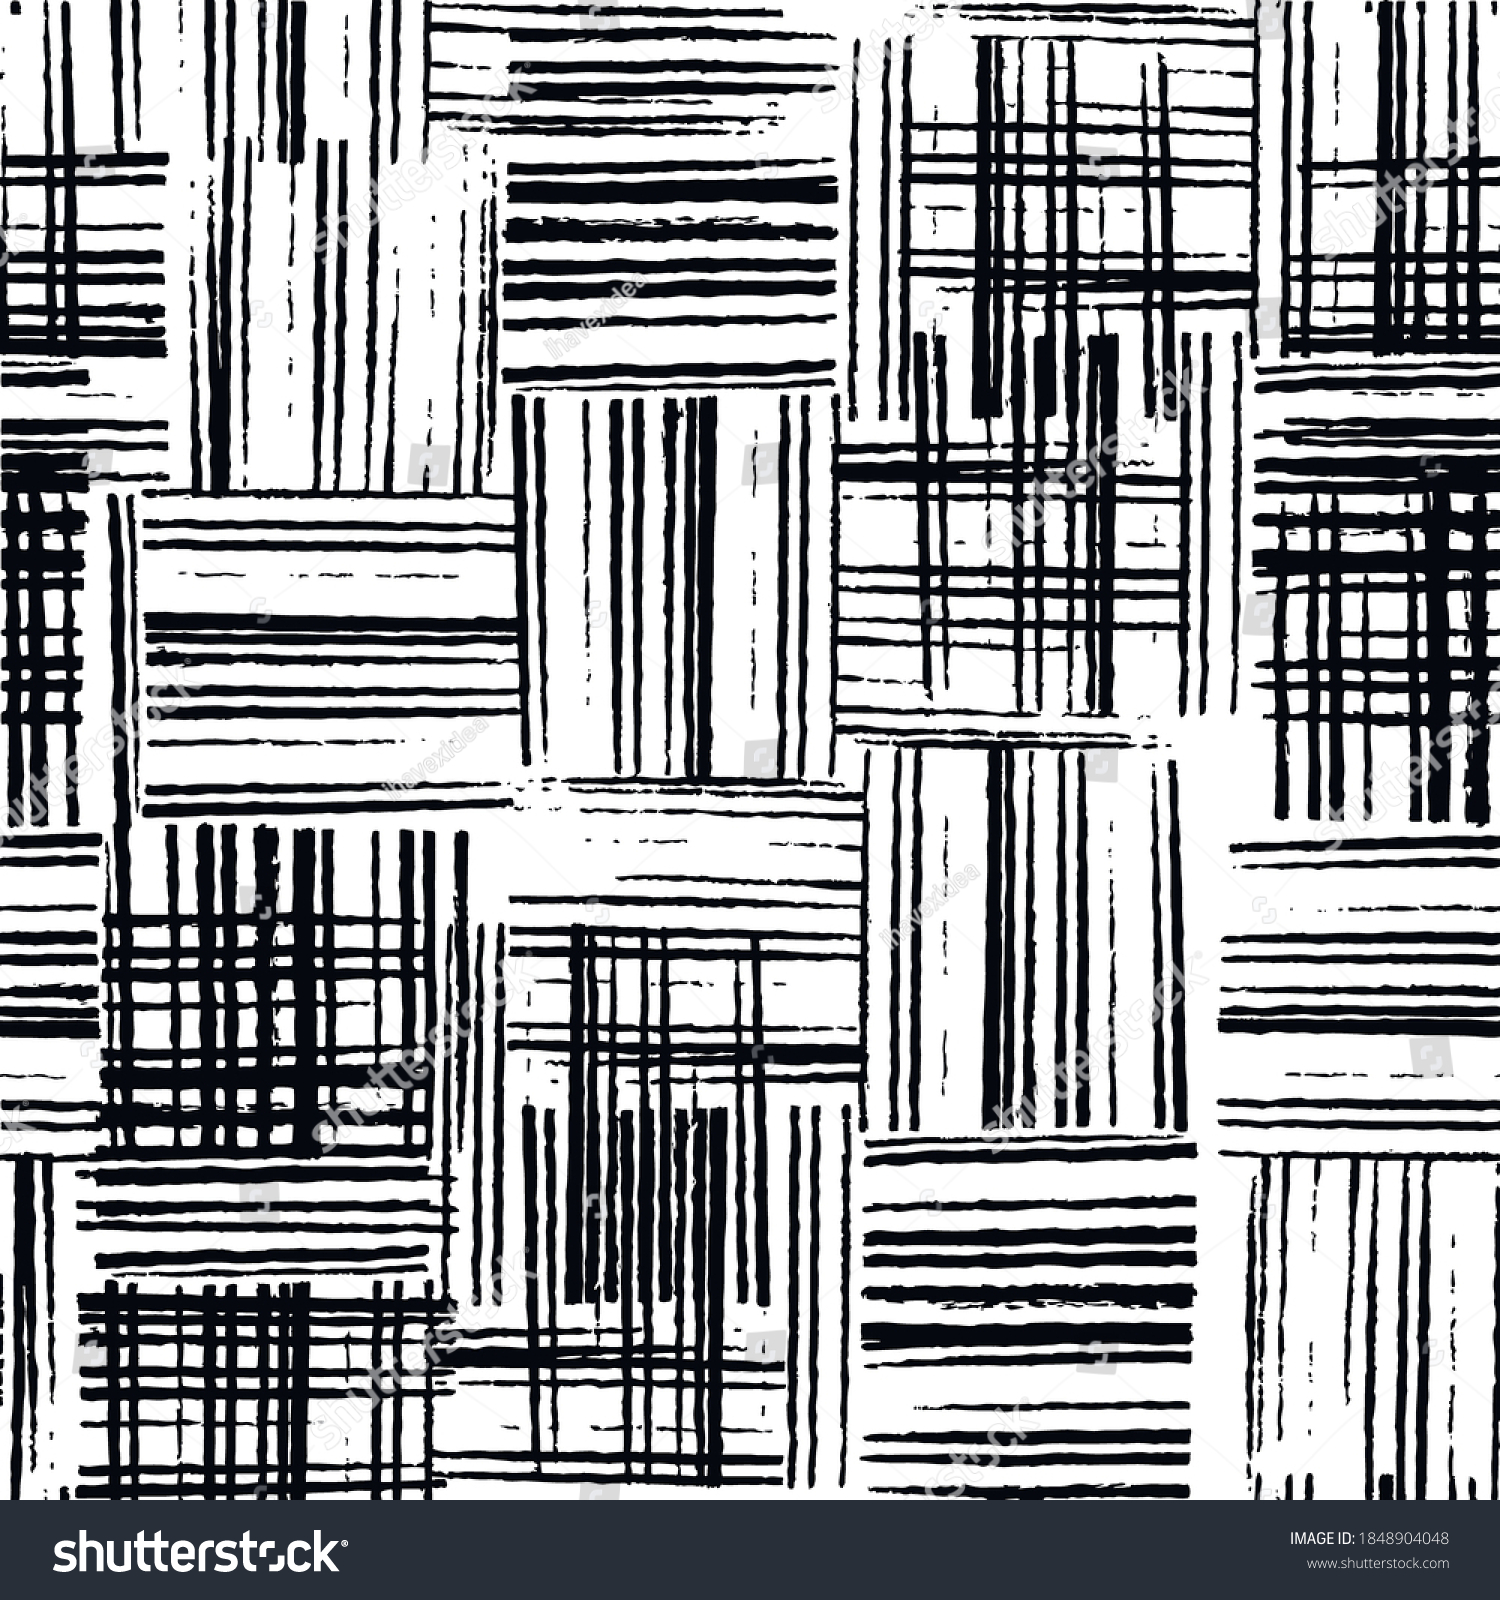 Brush Pattern Abstract Plaid Modern Texture Stock Vector (Royalty Free ...